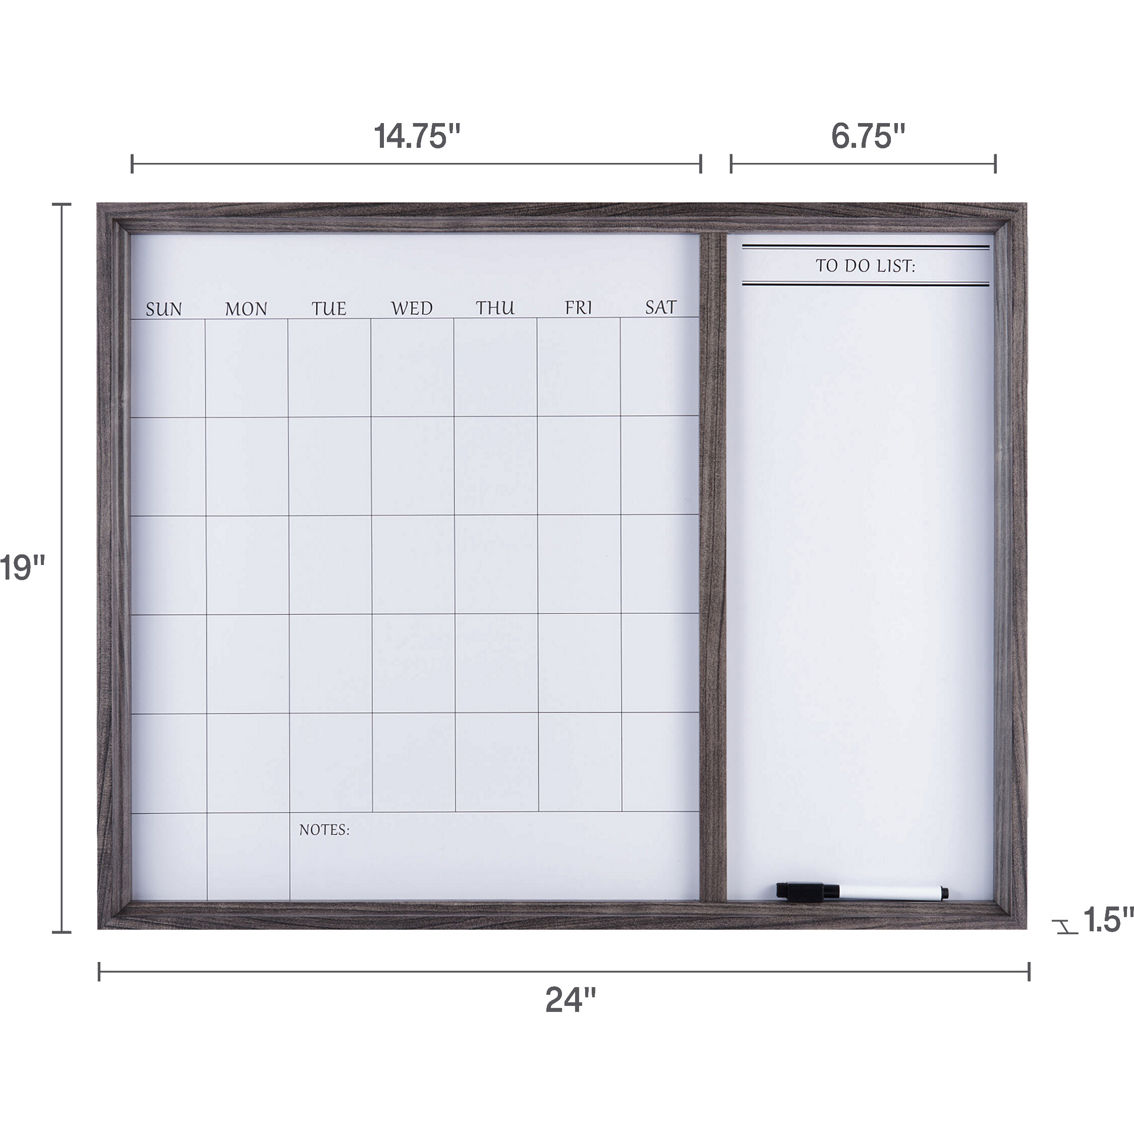 Towle Living 24 x 19 in. Whiteboard Calendar and To-Do Combo - Image 5 of 5